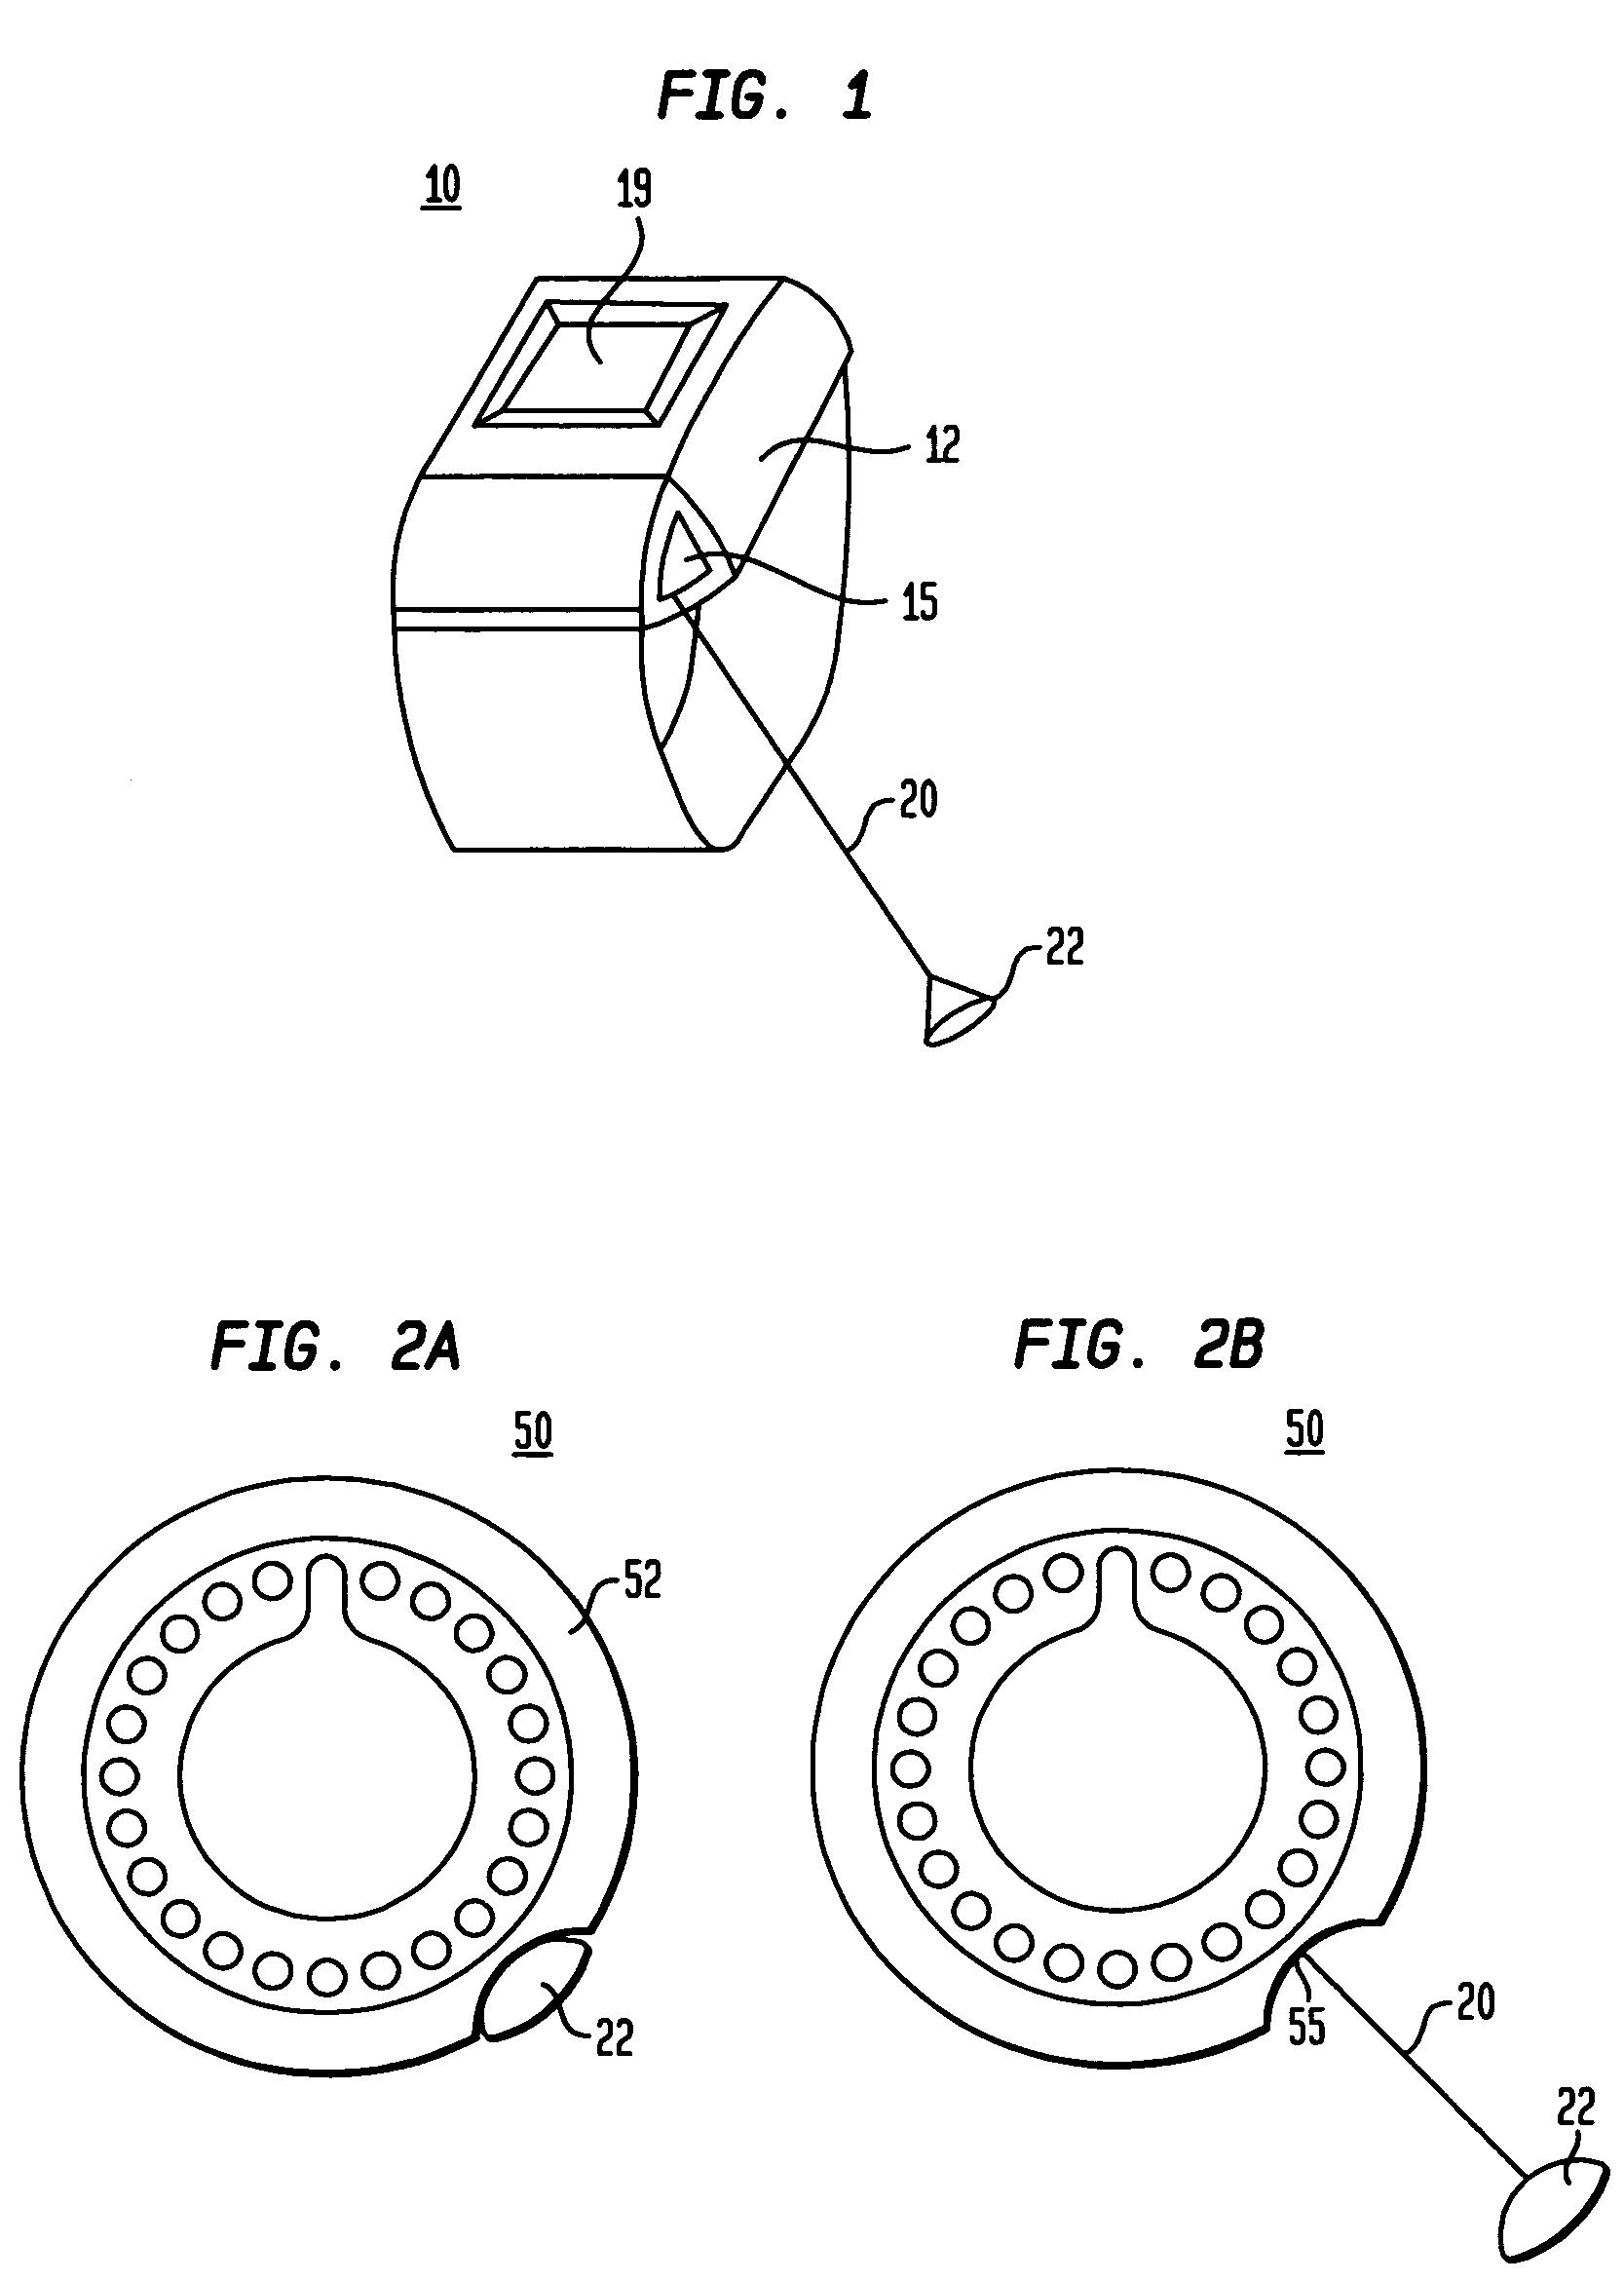 Retractable string interface for stationary and portable devices